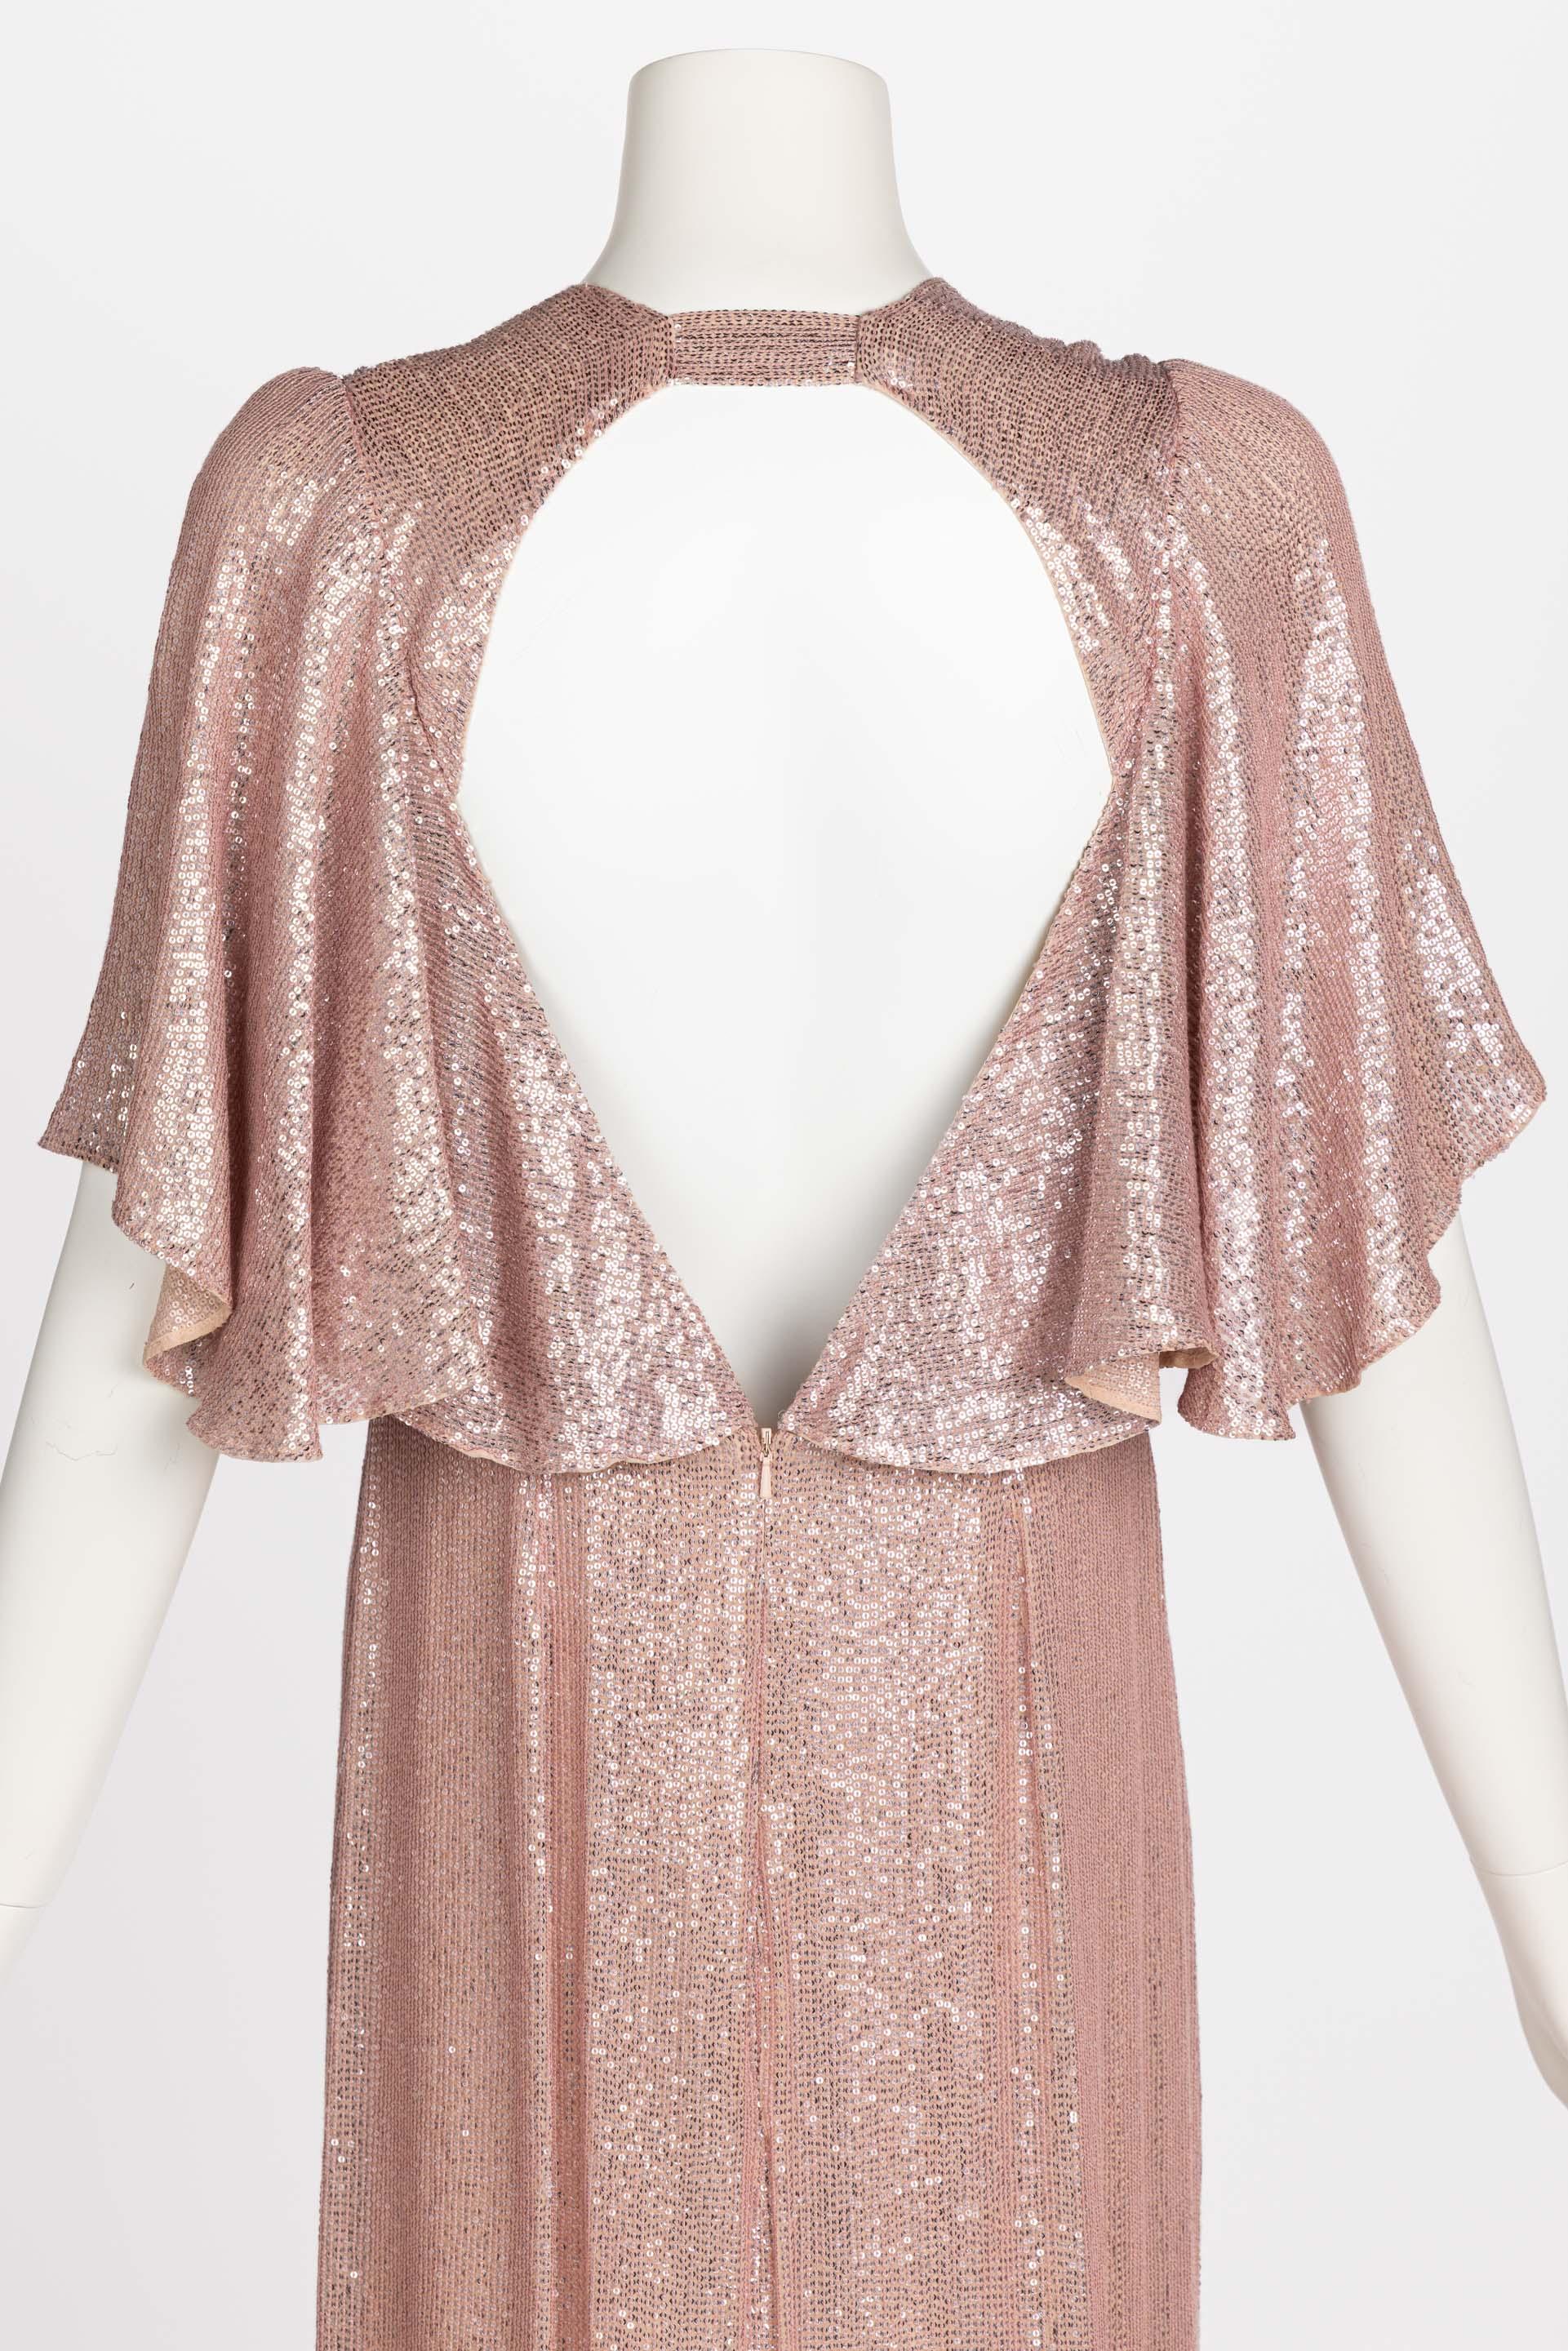 Women's Temperley London Pastel Pink Sequin Satin Cut Out Back Gown , Resort 2017